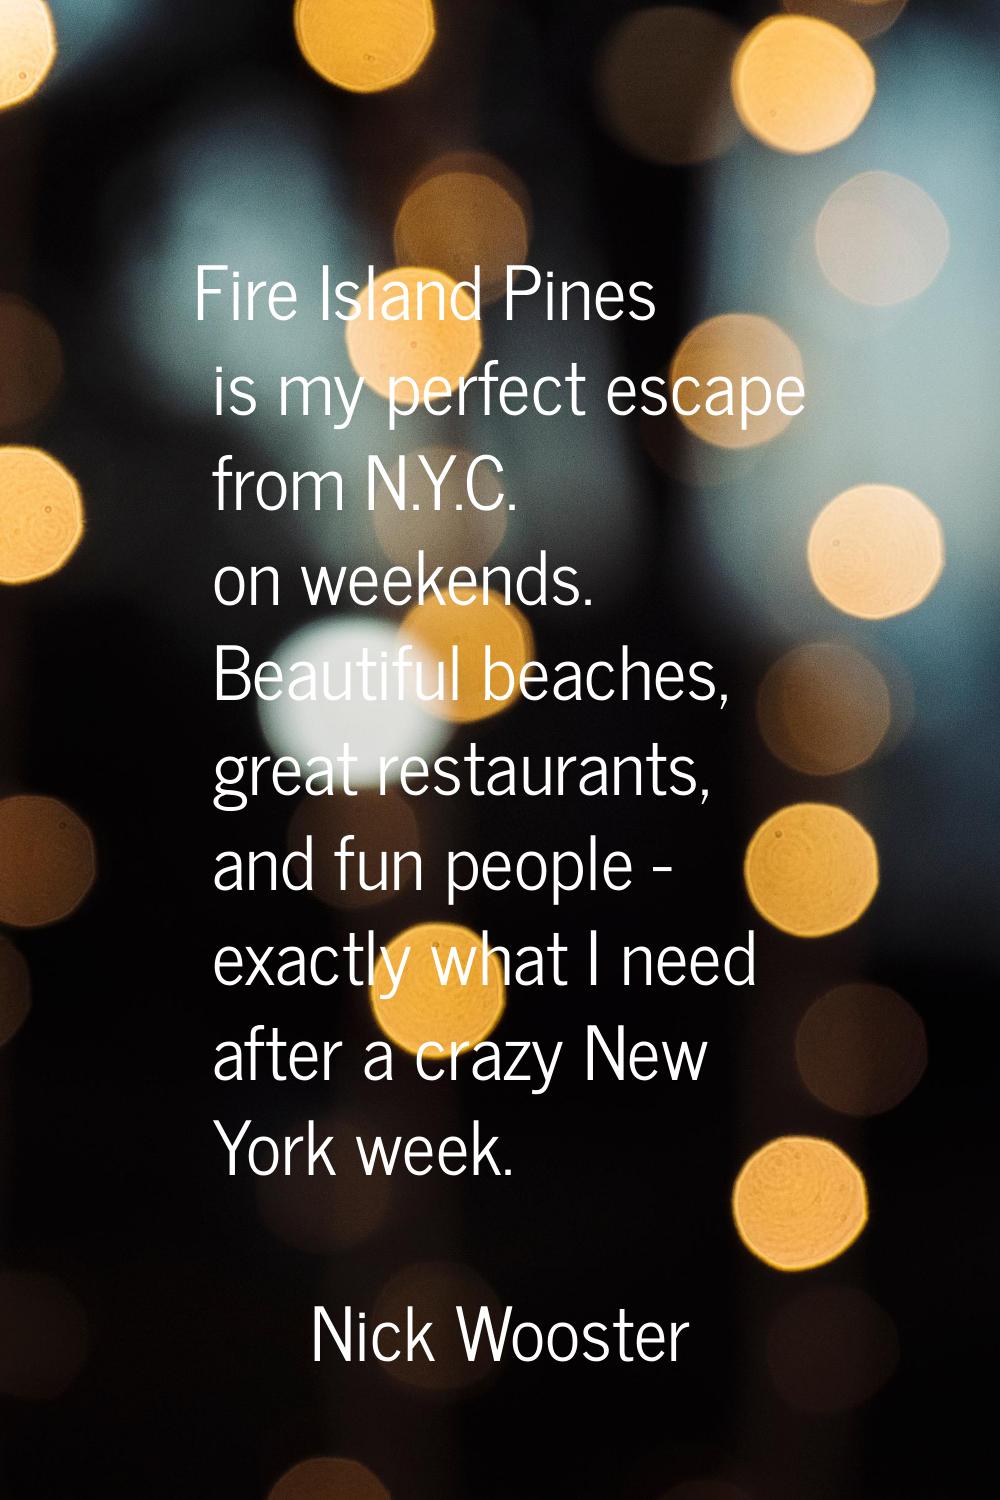 Fire Island Pines is my perfect escape from N.Y.C. on weekends. Beautiful beaches, great restaurant